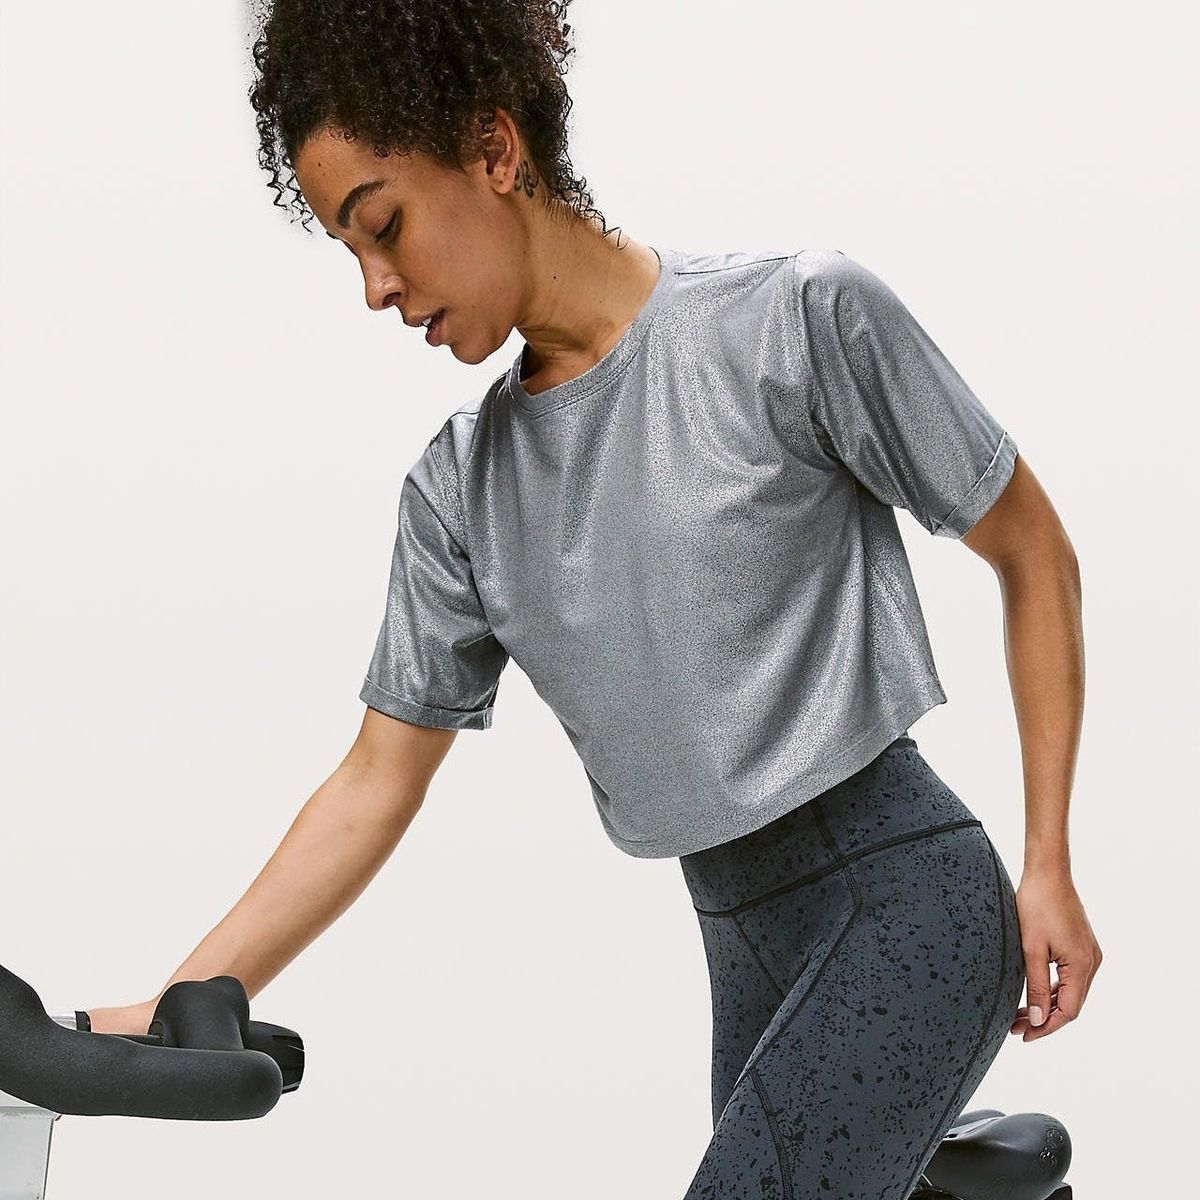 Get Ready to Tap It Back: Lululemon Just Launched the Perfect SoulCycle Collection